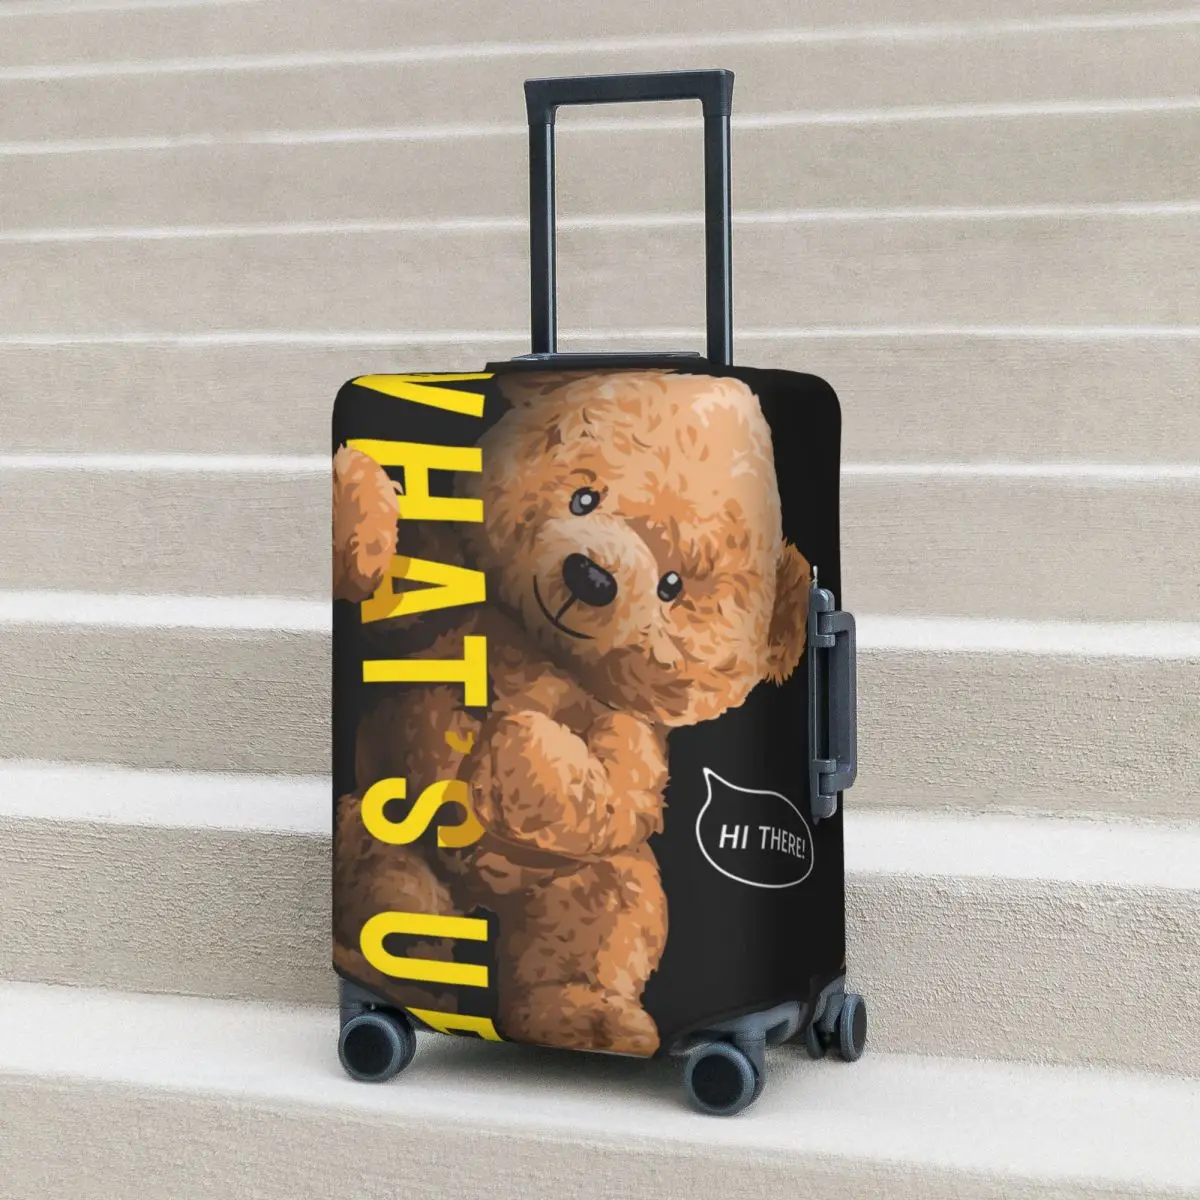 

Toy Bear Suitcase Cover What Is Up Hi There Strectch Travel Protection Luggage Case Vacation